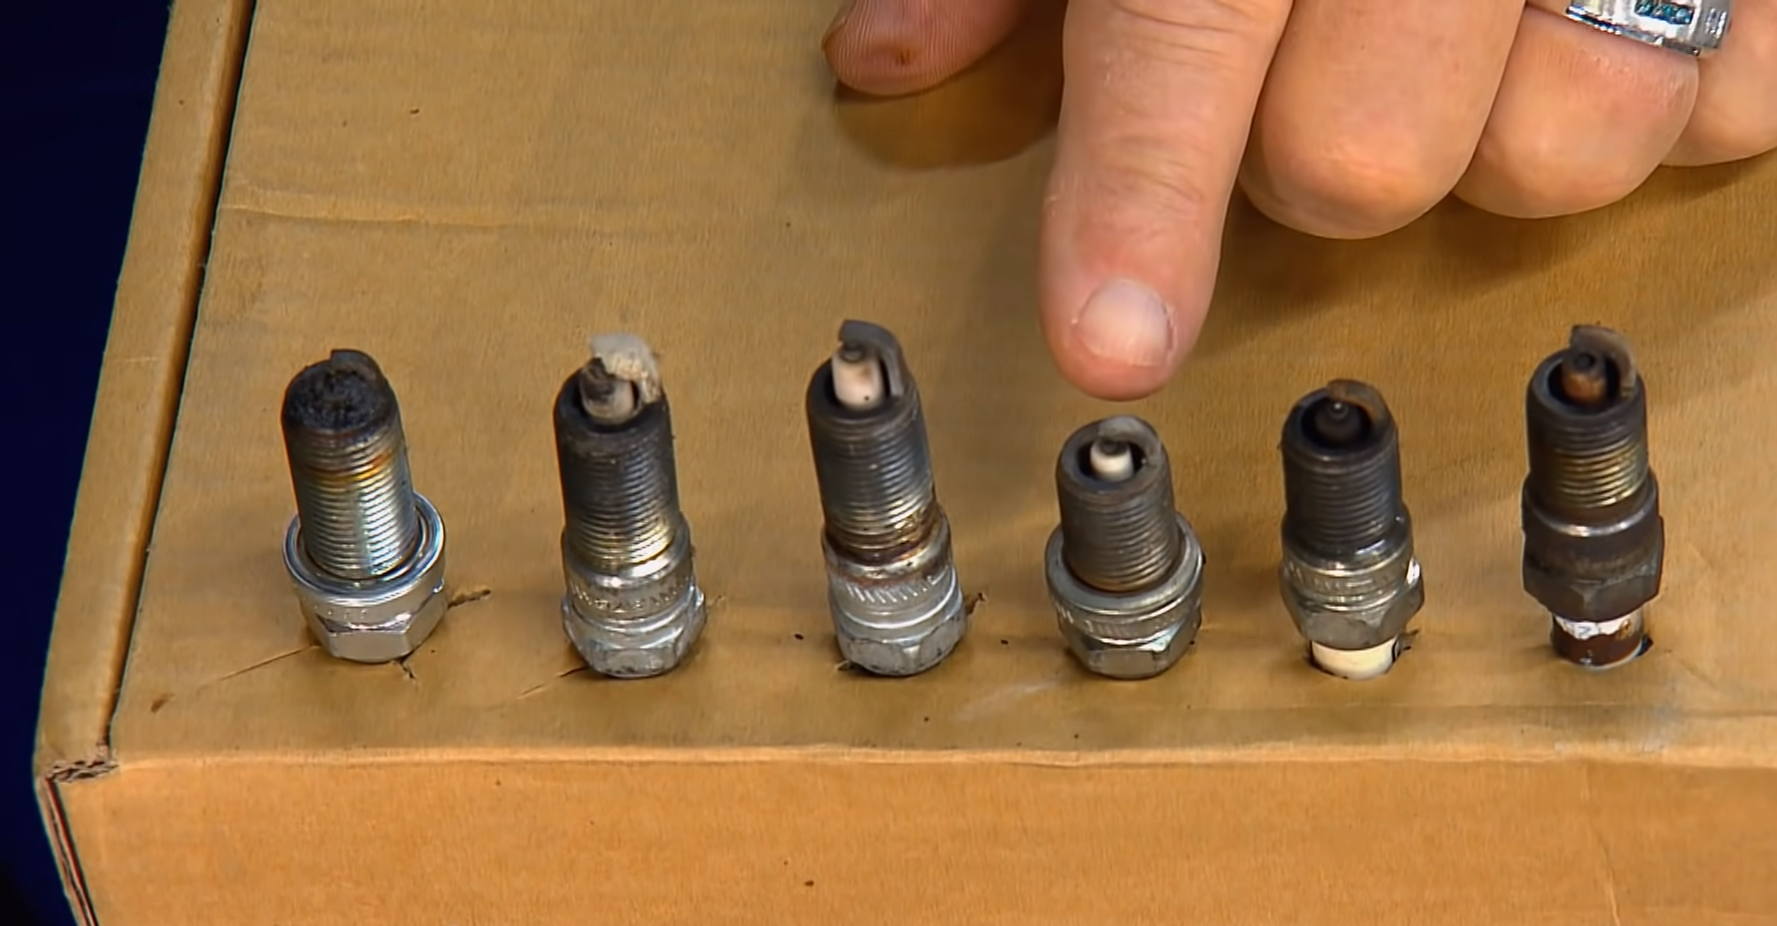 4 Main Causes of a Spark Plug to Turn Black and the Best Ways to Fix Them